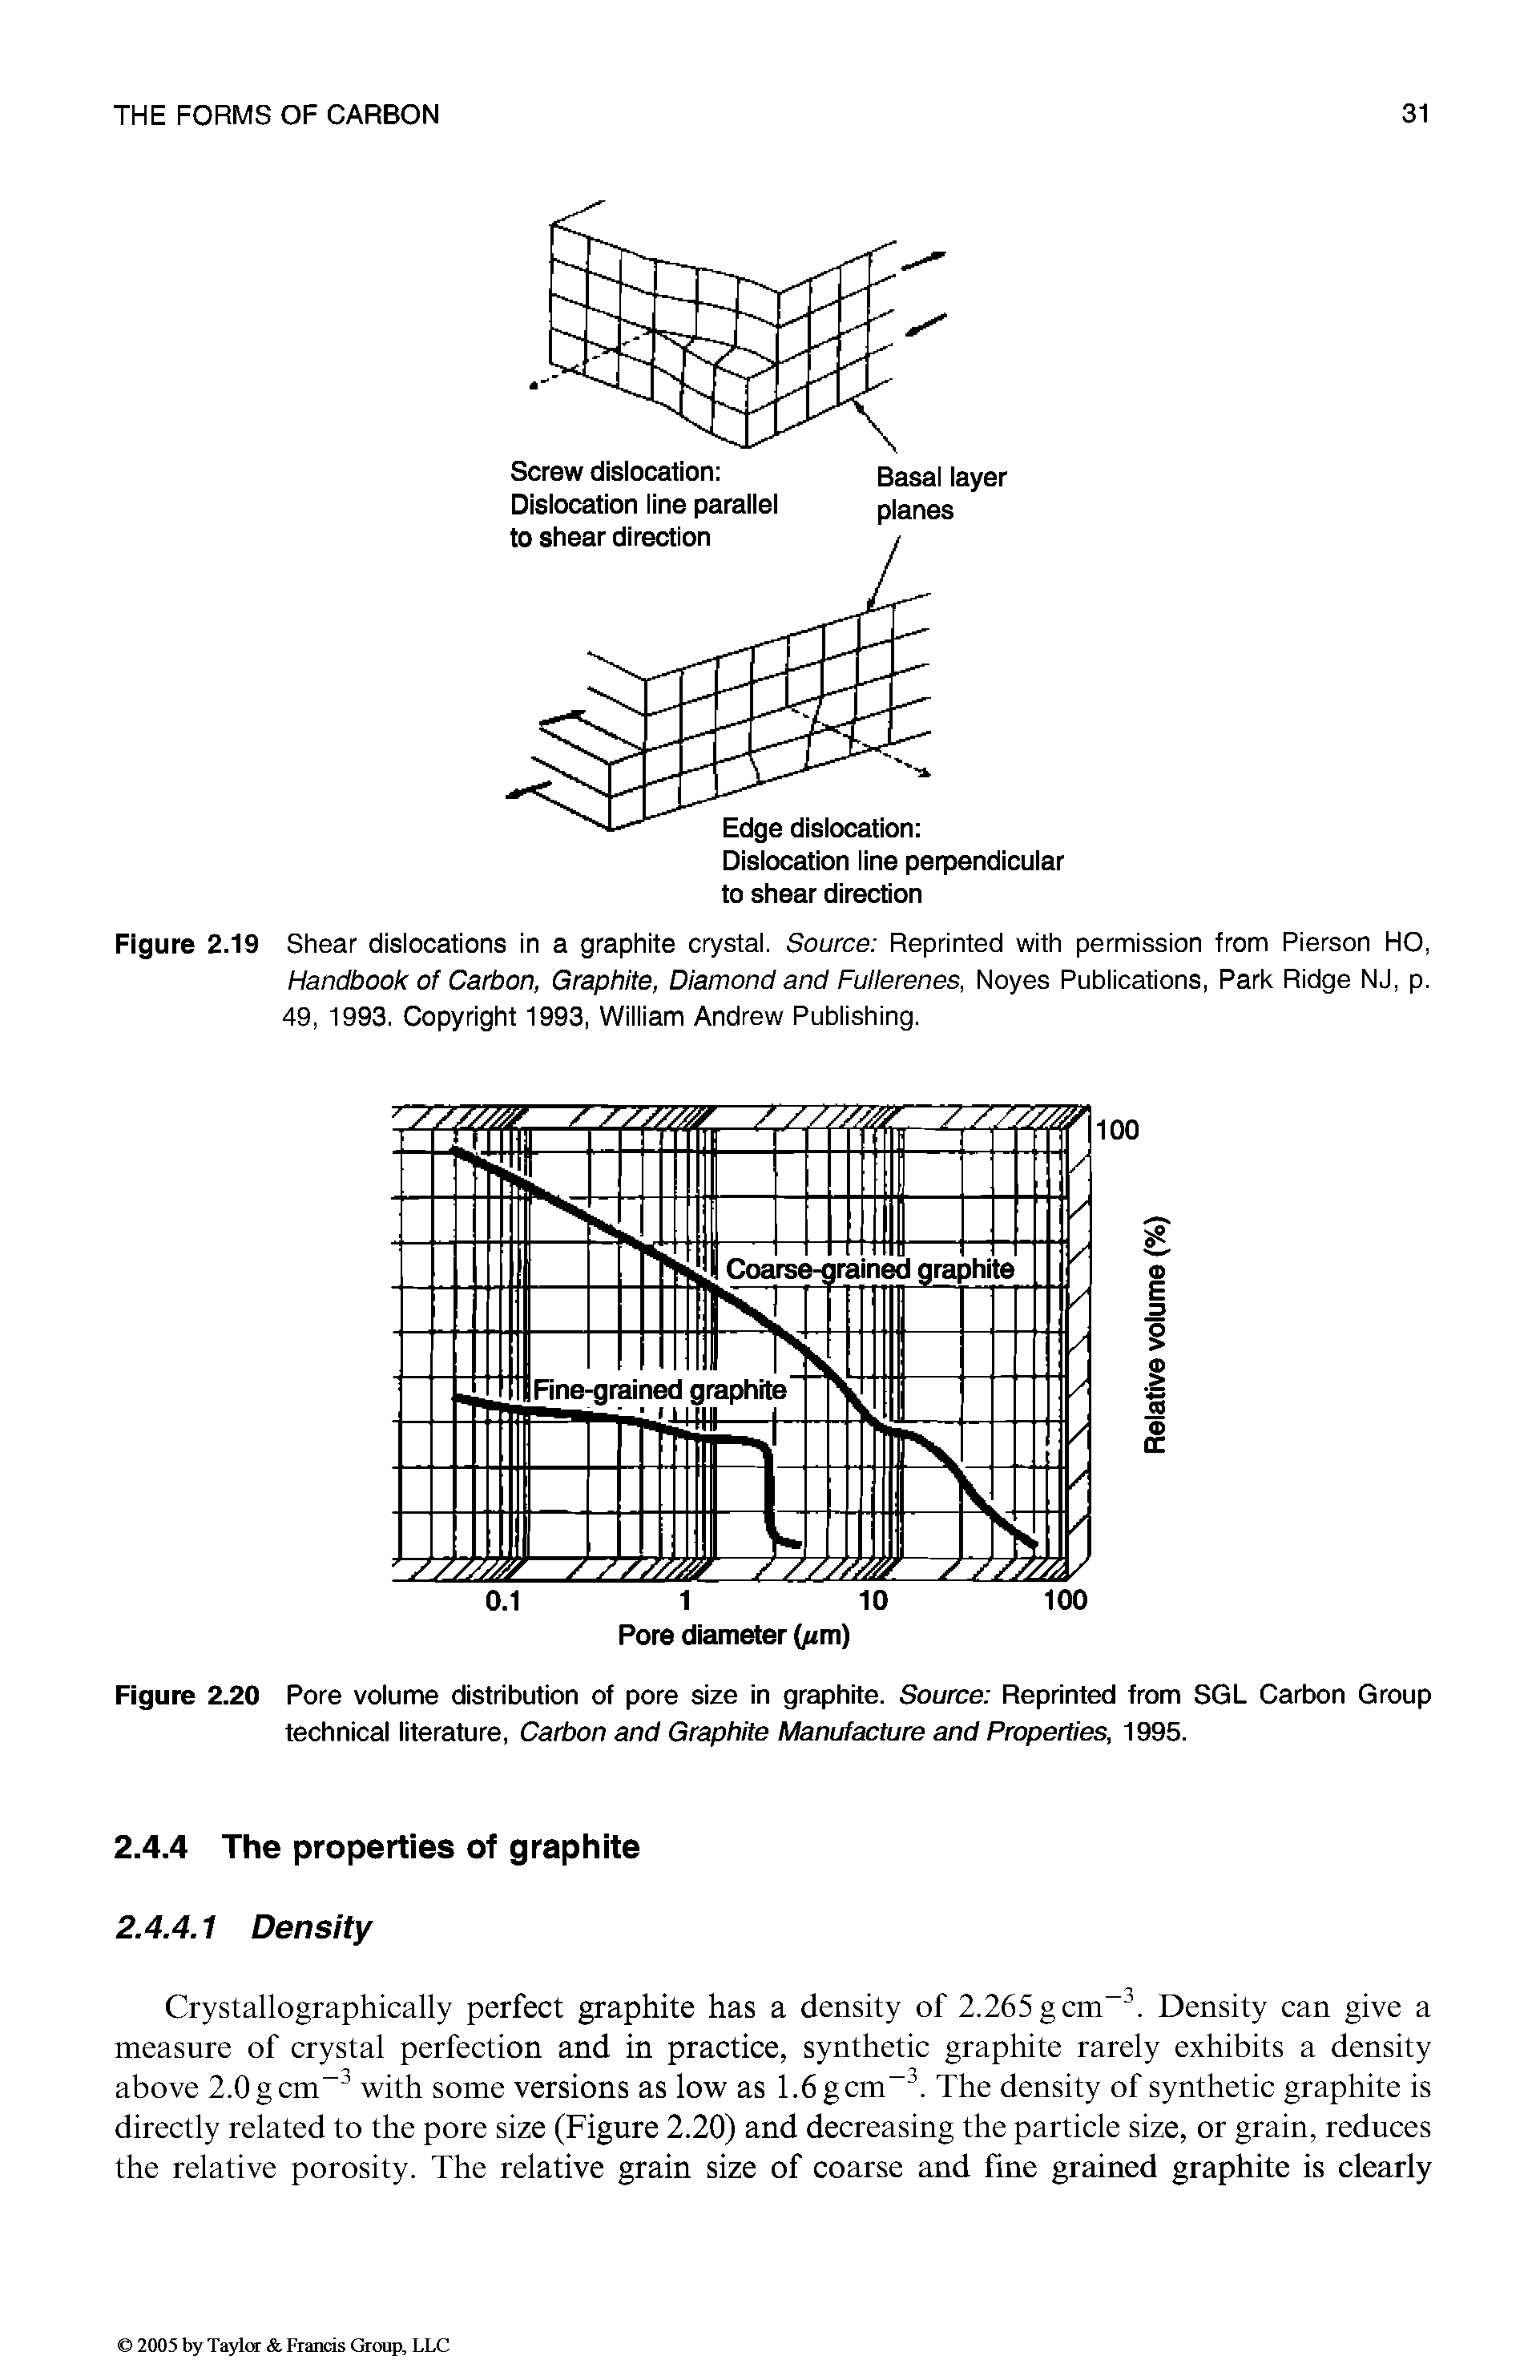 Figure 2.19 Shear dislocations in a graphite crystal. Source Reprinted with permission from Pierson HO, Handbook of Carbon, Graphite, Diamond and Fuiierenes, Noyes Publications, Park Ridge NJ, p. 49, 1993. Copyright 1993, William Andrew Publishing.